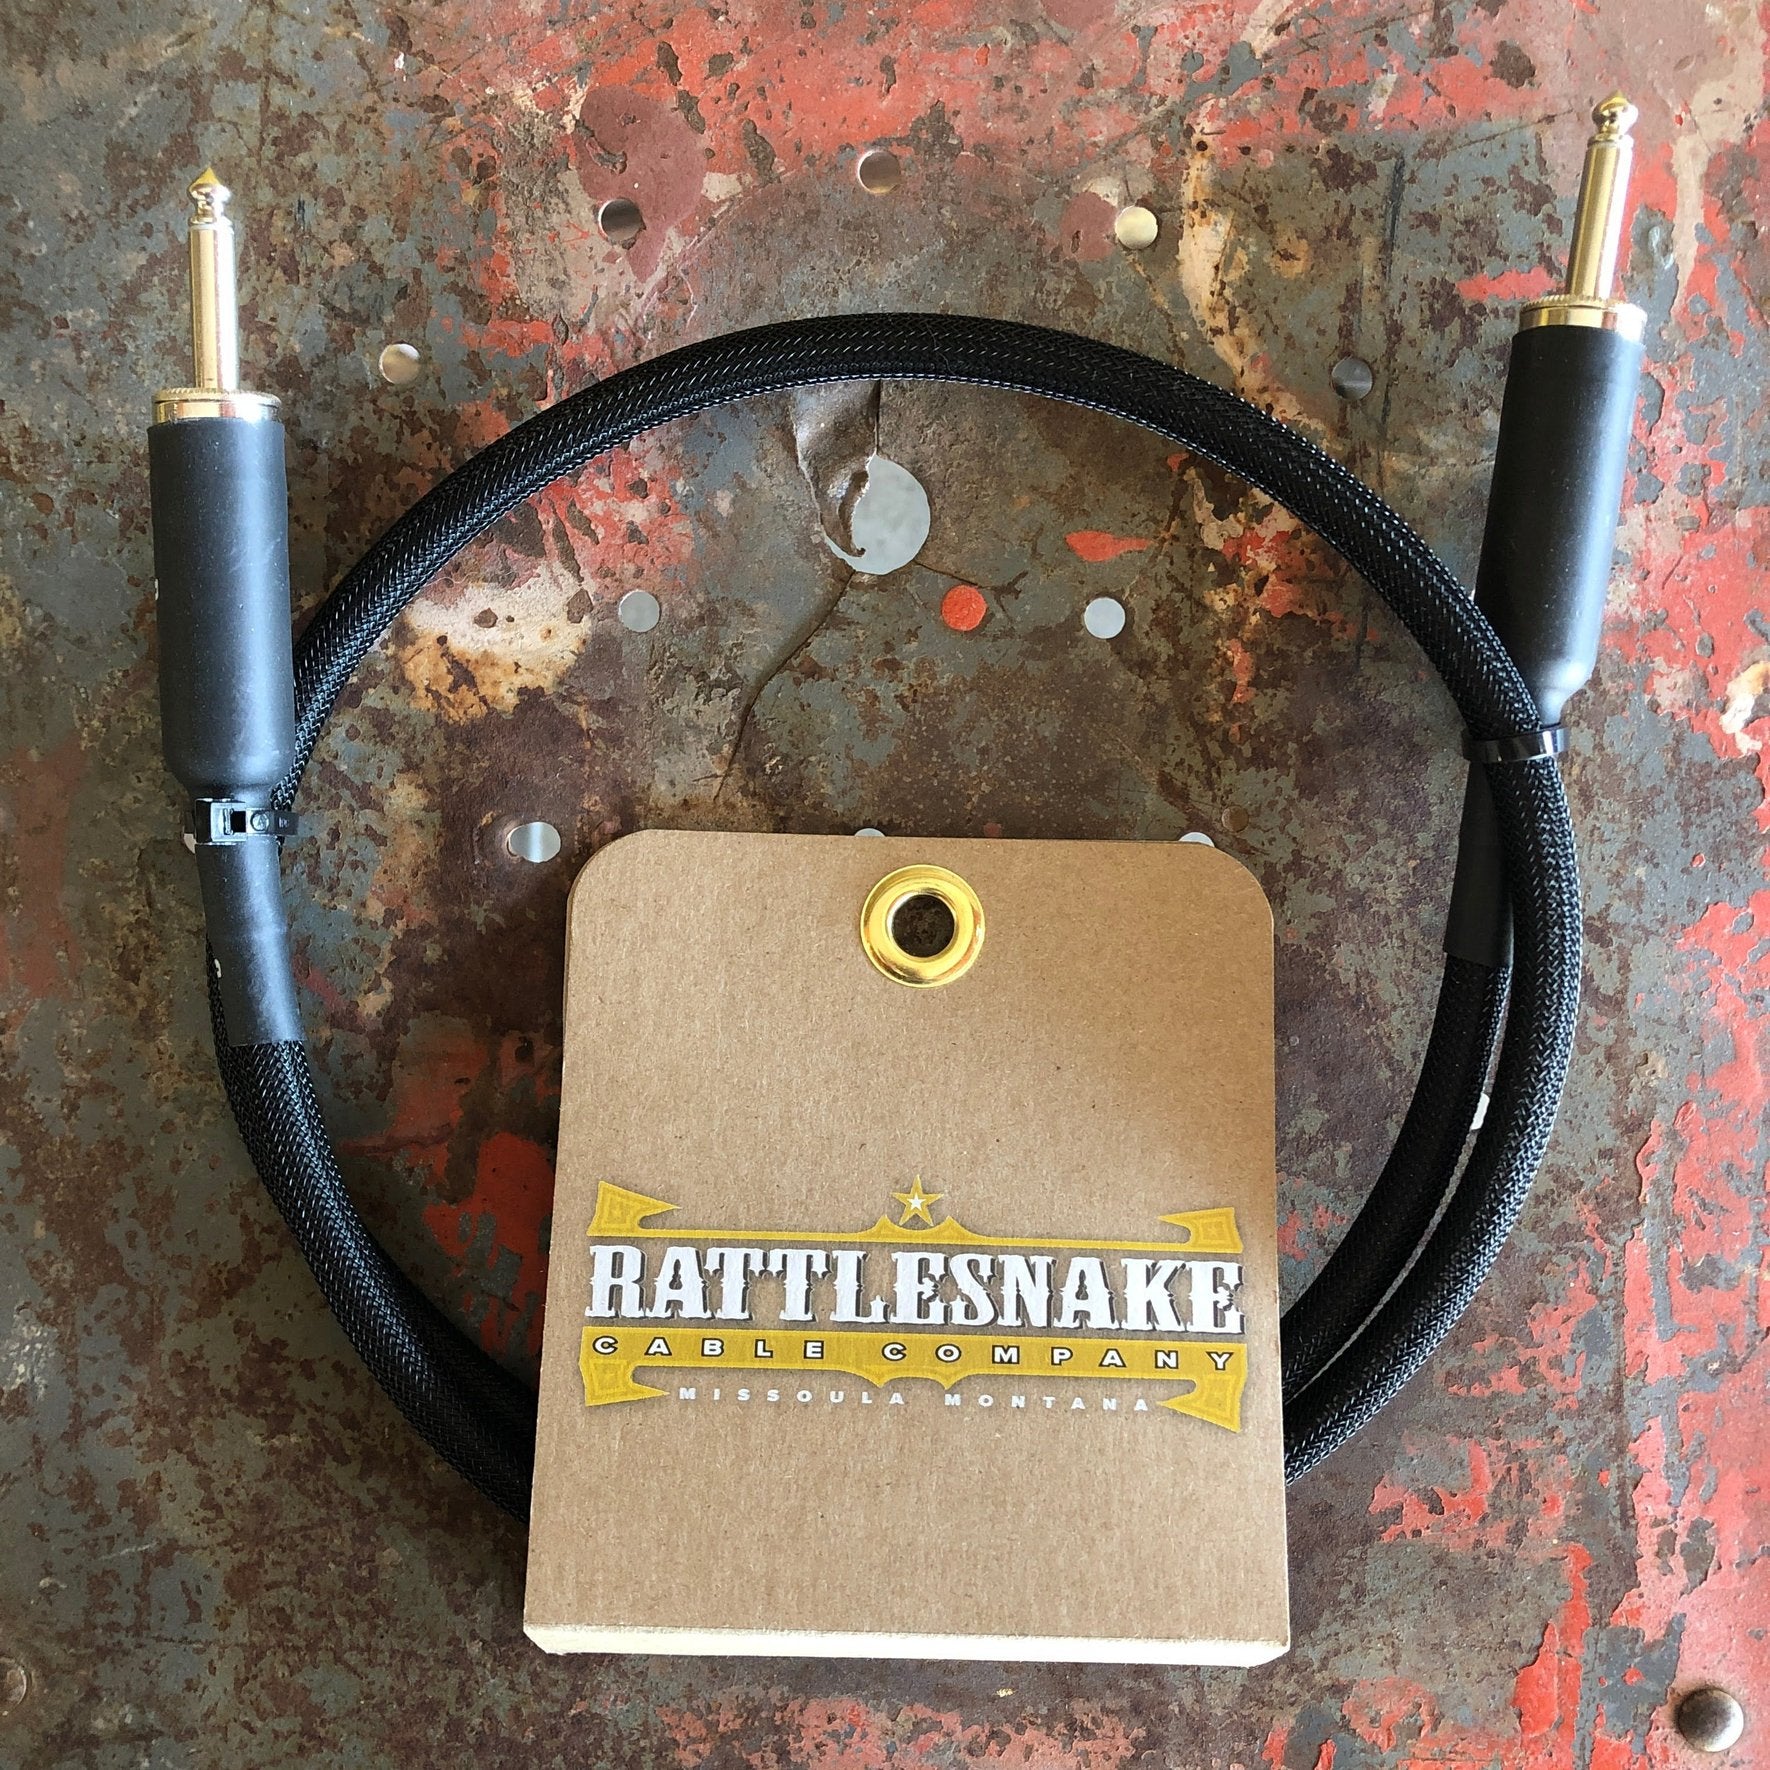 Rattlesnake Cable Company 8' Speaker Cable - Black